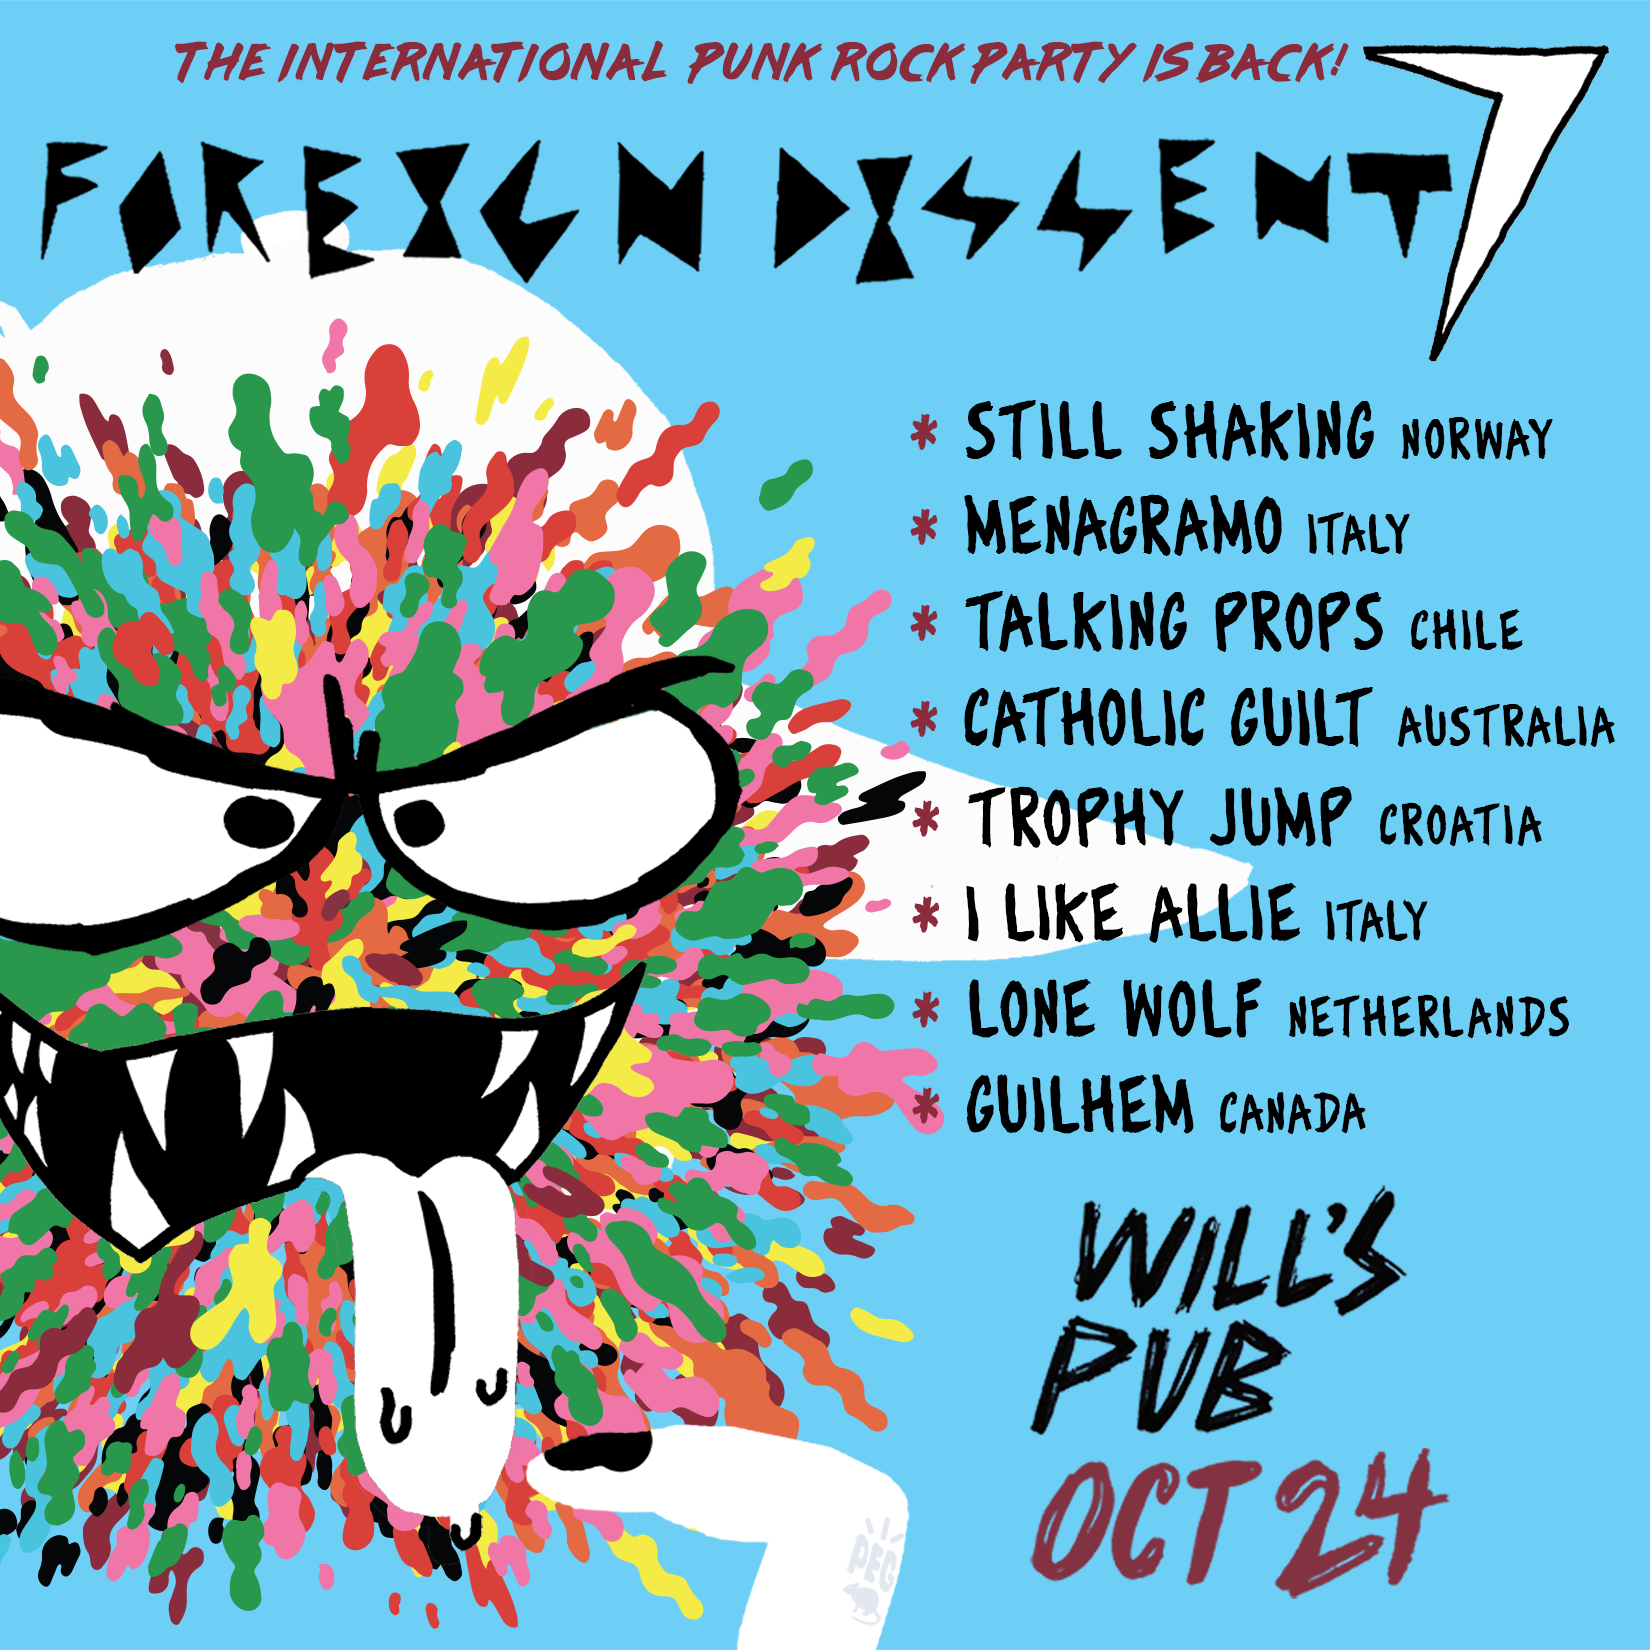 Foreign Dissent 7, the International Punk Rock Party, is on October 24 at Will's Pub in Orlando Florida and features Still Shaking from Norway, Menagramo from Italy, Catholic Guilt from Australia, Trophy Jump from Croatia, I Like Allie from Italy, Lone Wolf from the Netherlands, and Guilhem from Canada.